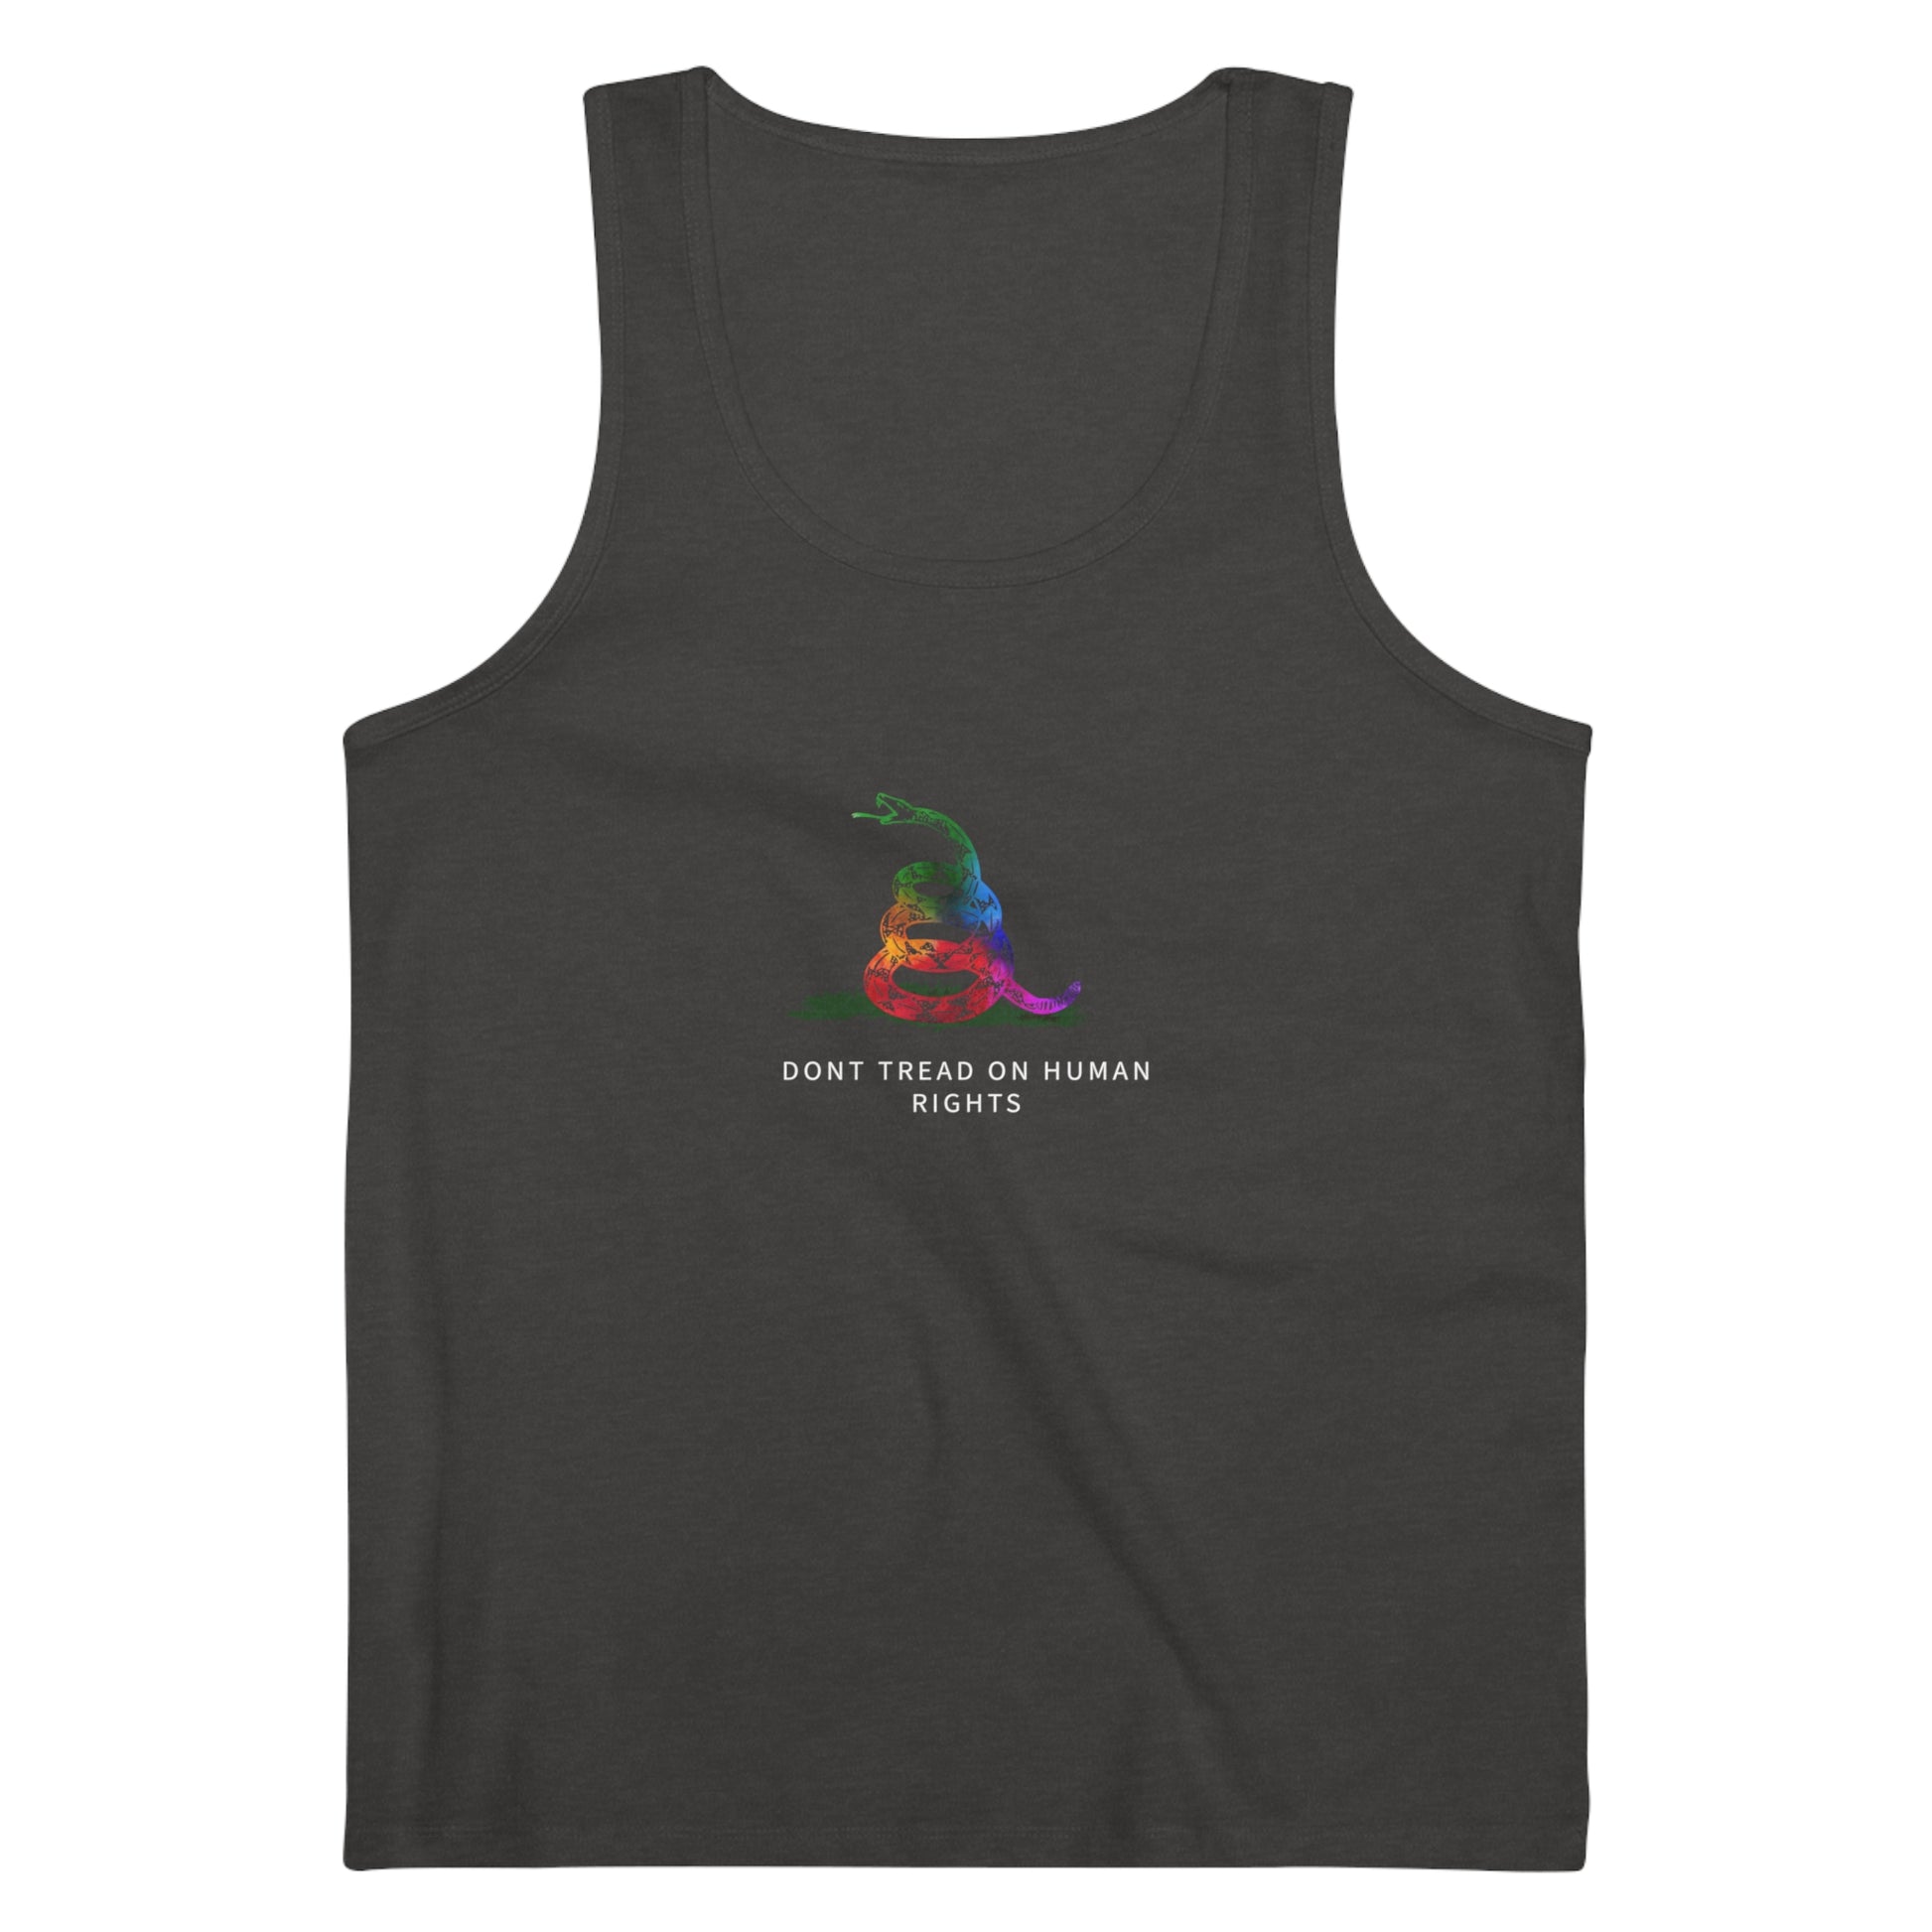 DONT TREAD ON HUMAN RIGHTS | Jersey Tank LGBTQ Queer Gay Protest Rally Pride Gadsden flag Congress